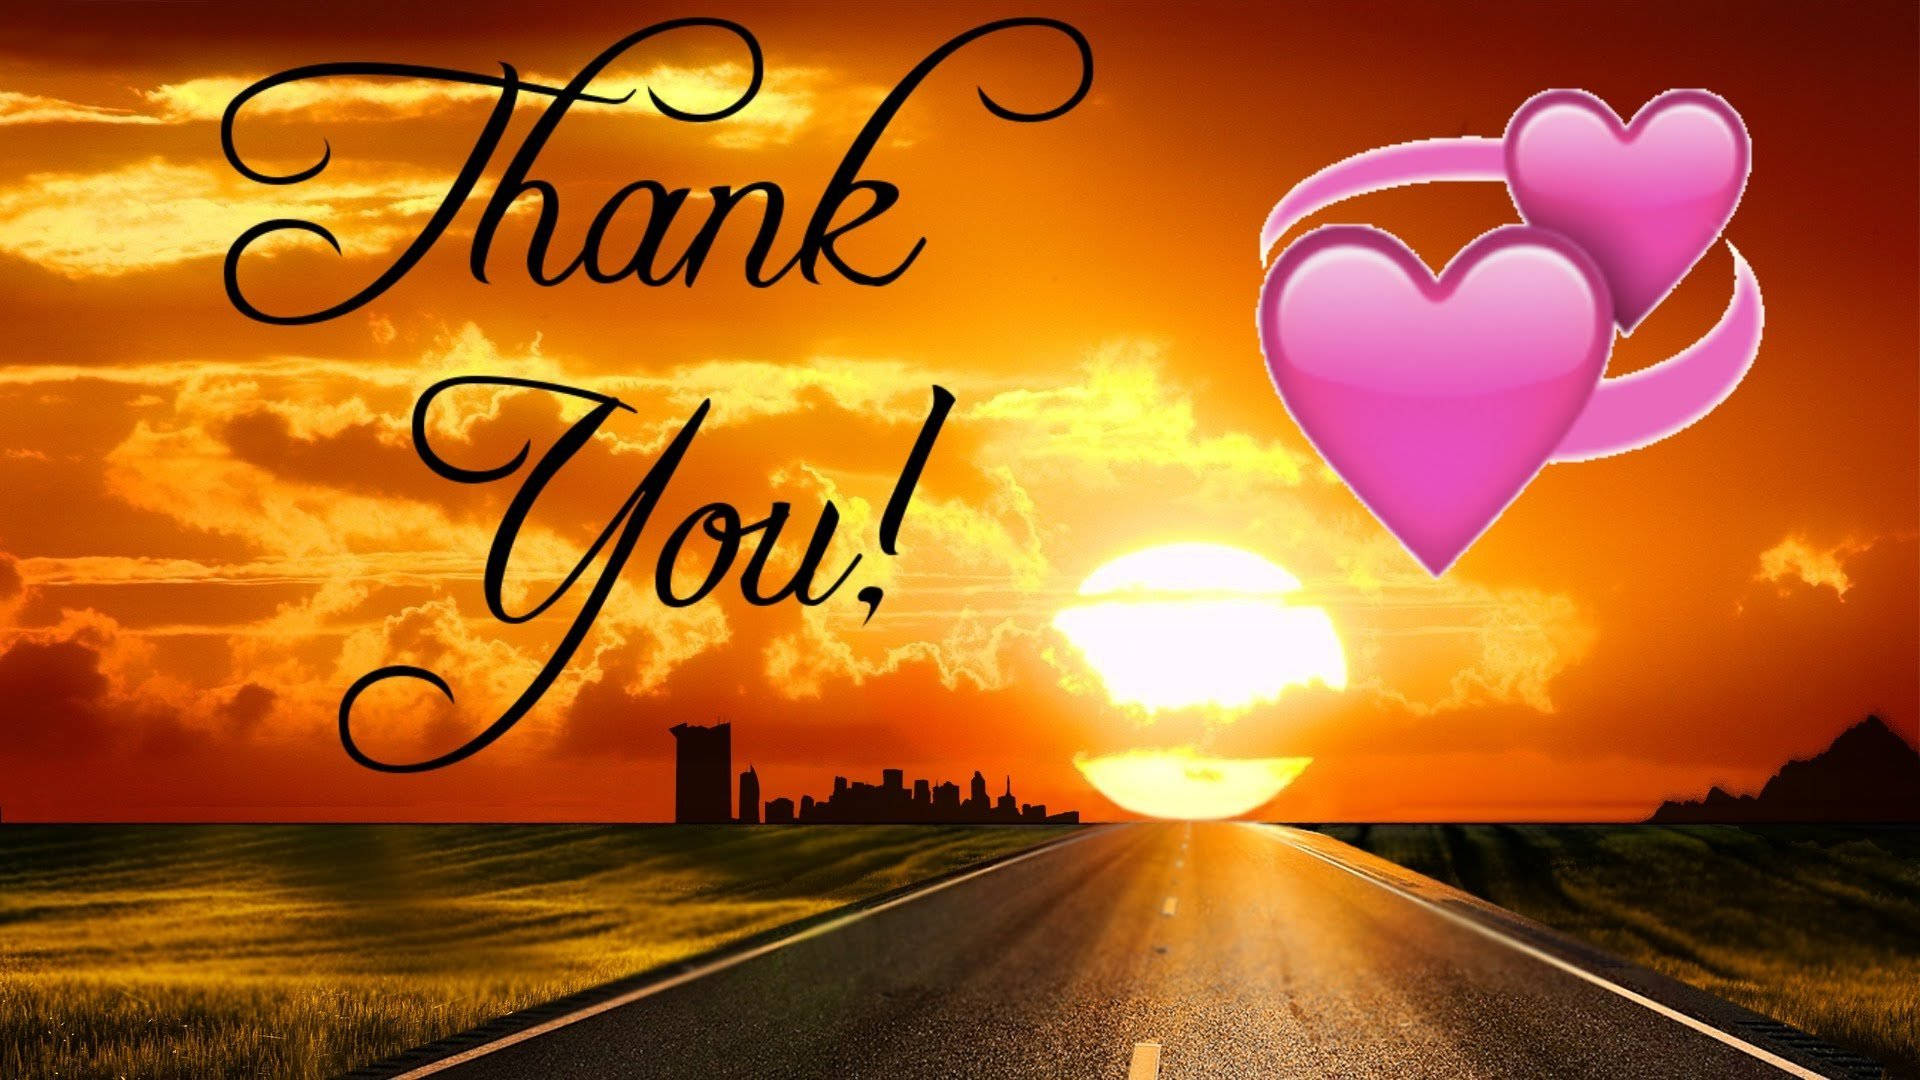 A Heartfelt Thank You Note With Stunning Background